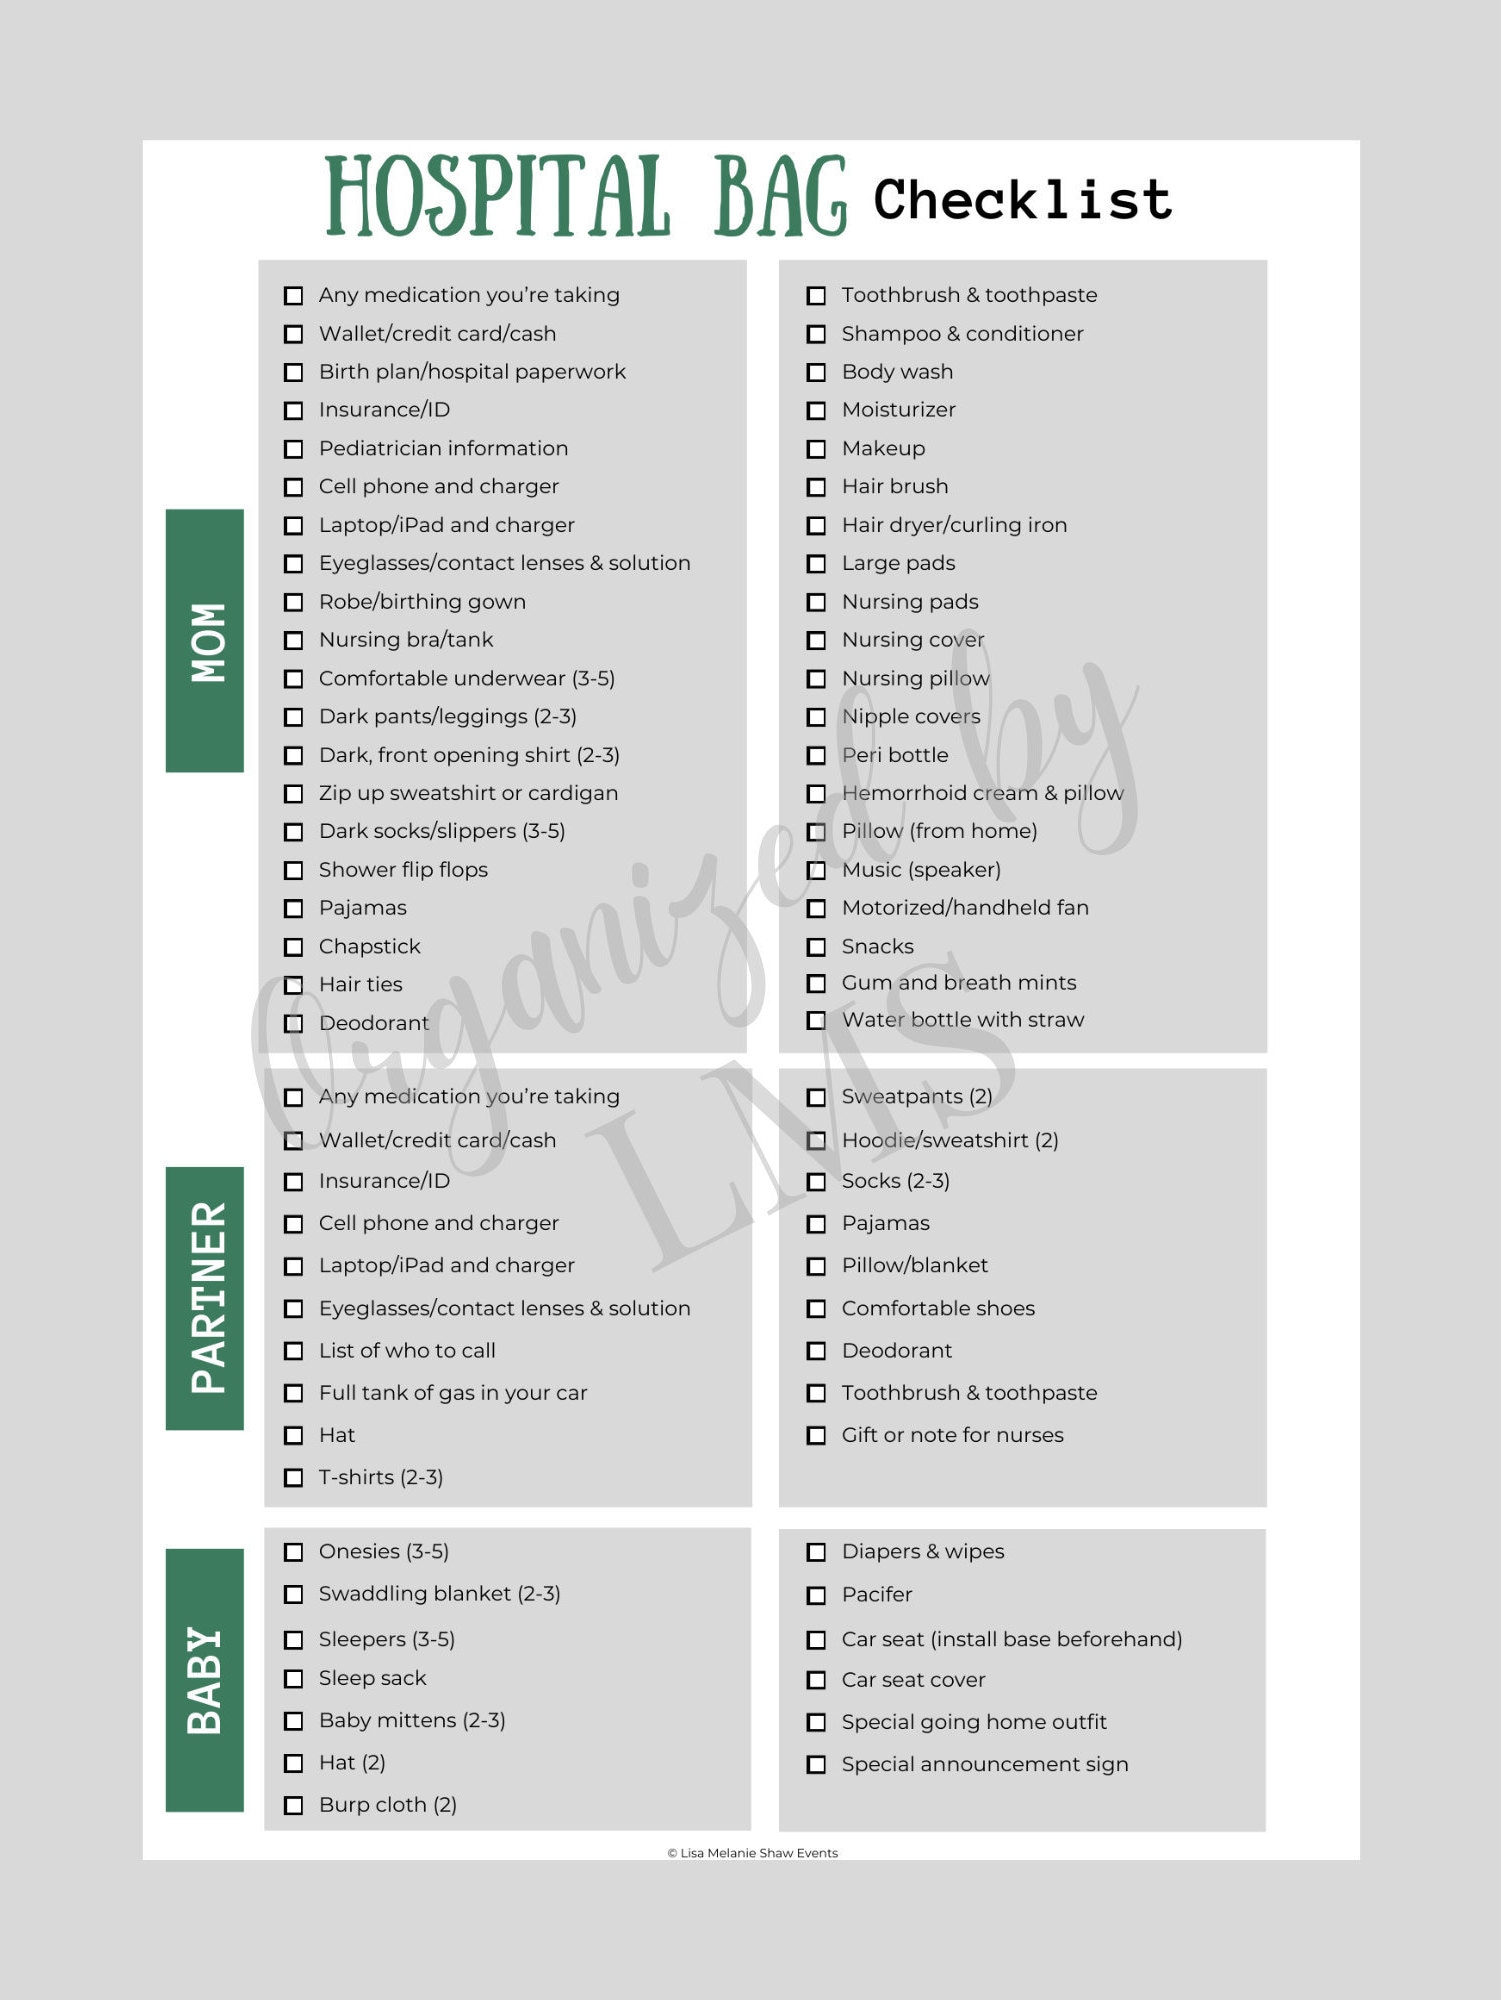 C-Section Hospital Bag Checklist - From A Mom Who's Had Three